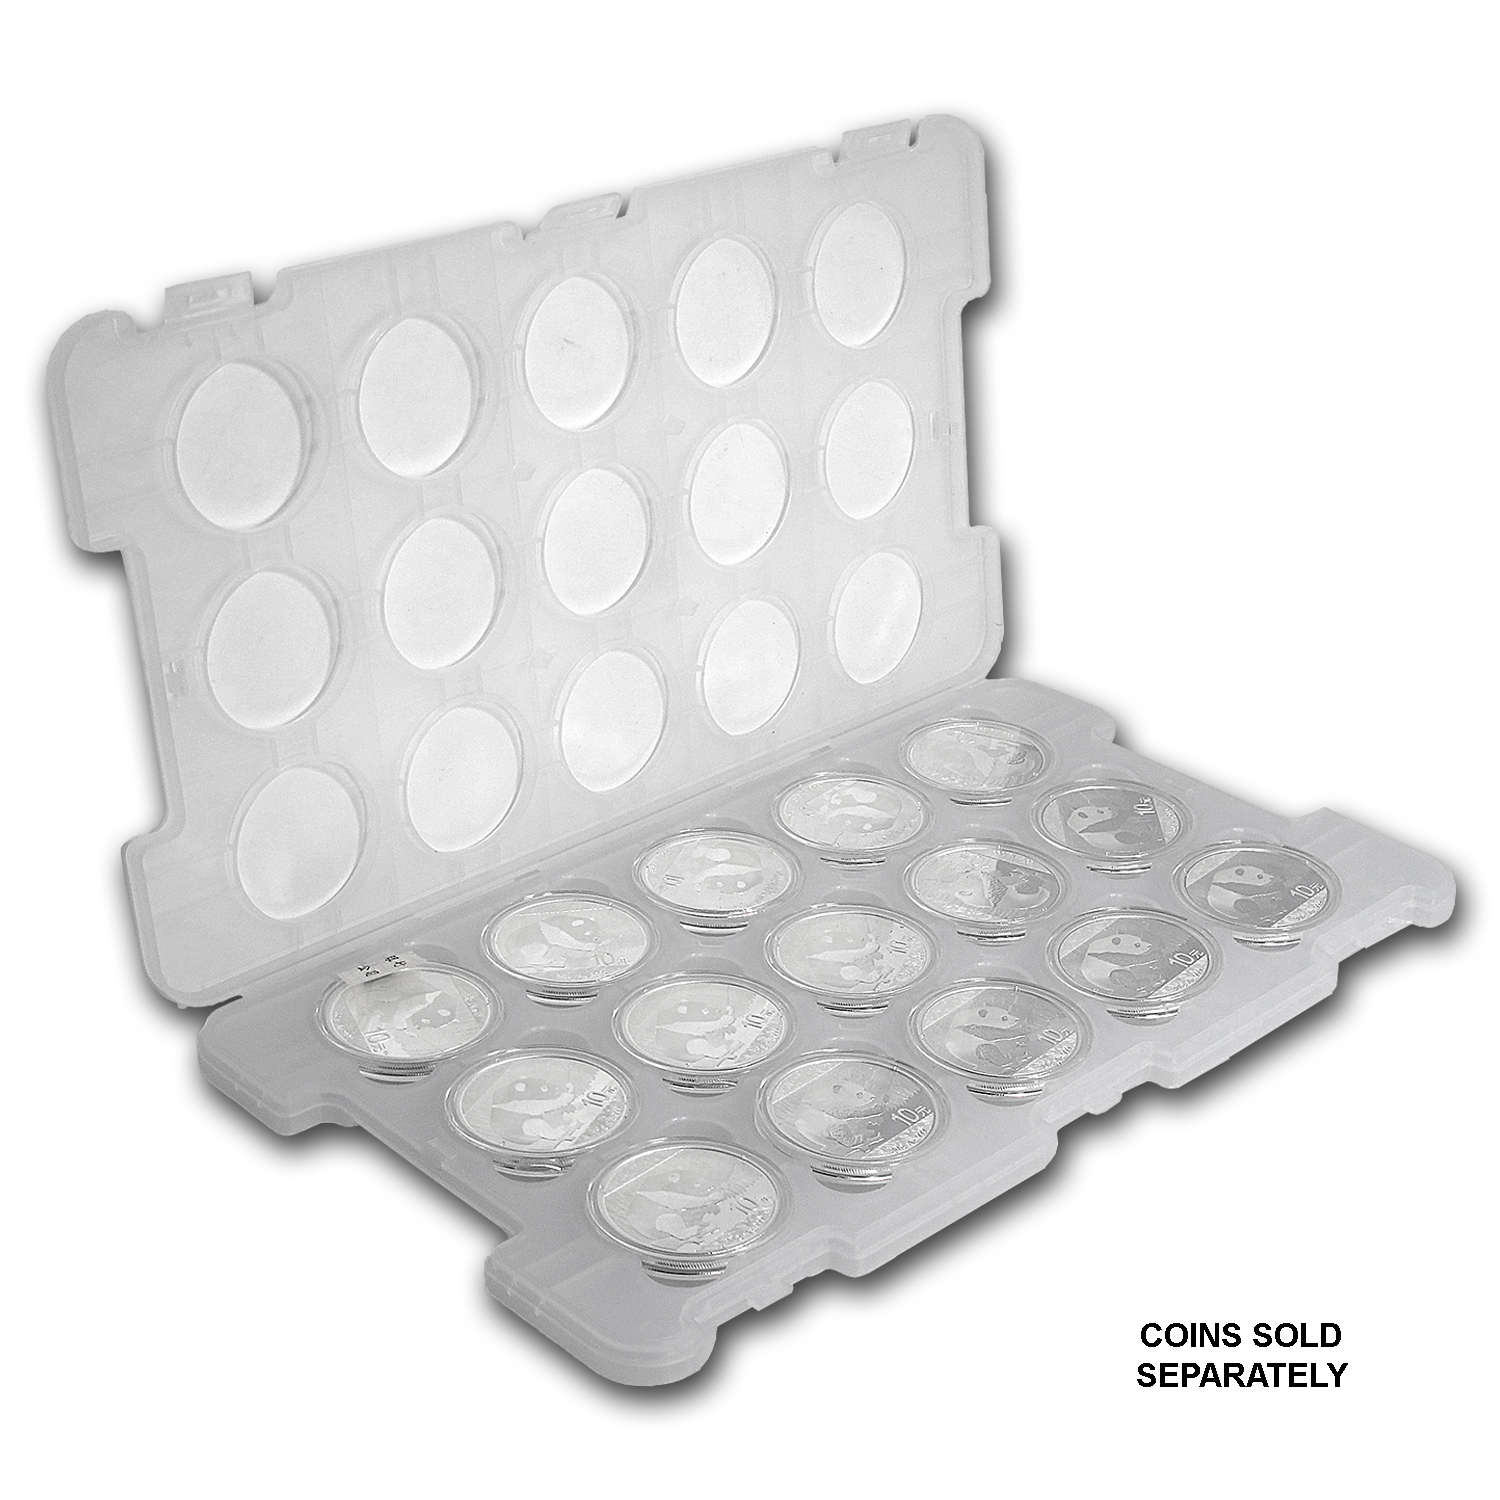 Buy 15-Coin Tray for 30 gram/1 oz Silver Chinese Panda Coin - Click Image to Close